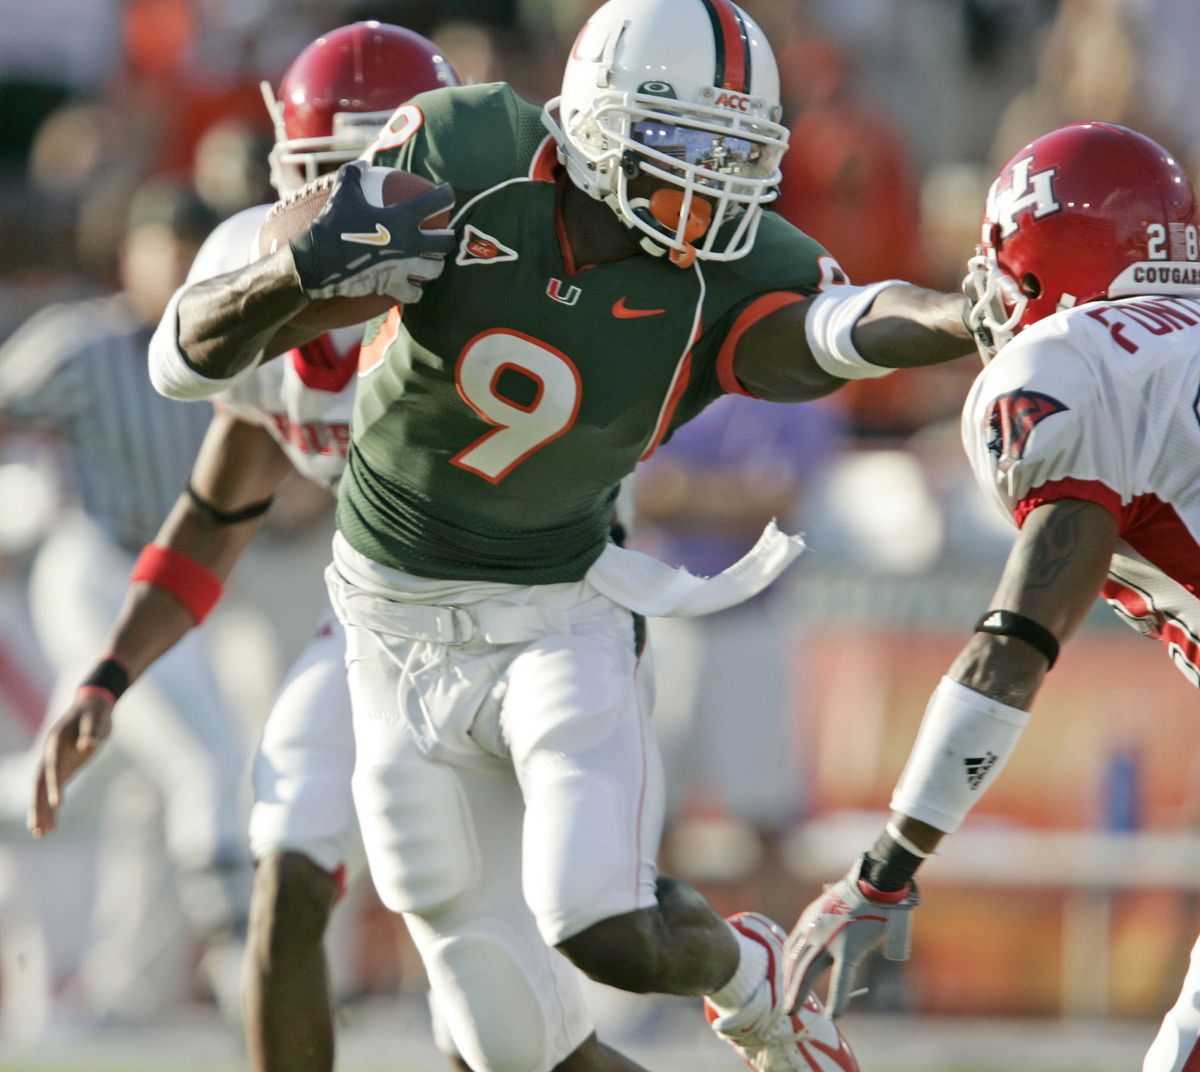 University of Miami’s Lance Leggett carries the ball on a lo